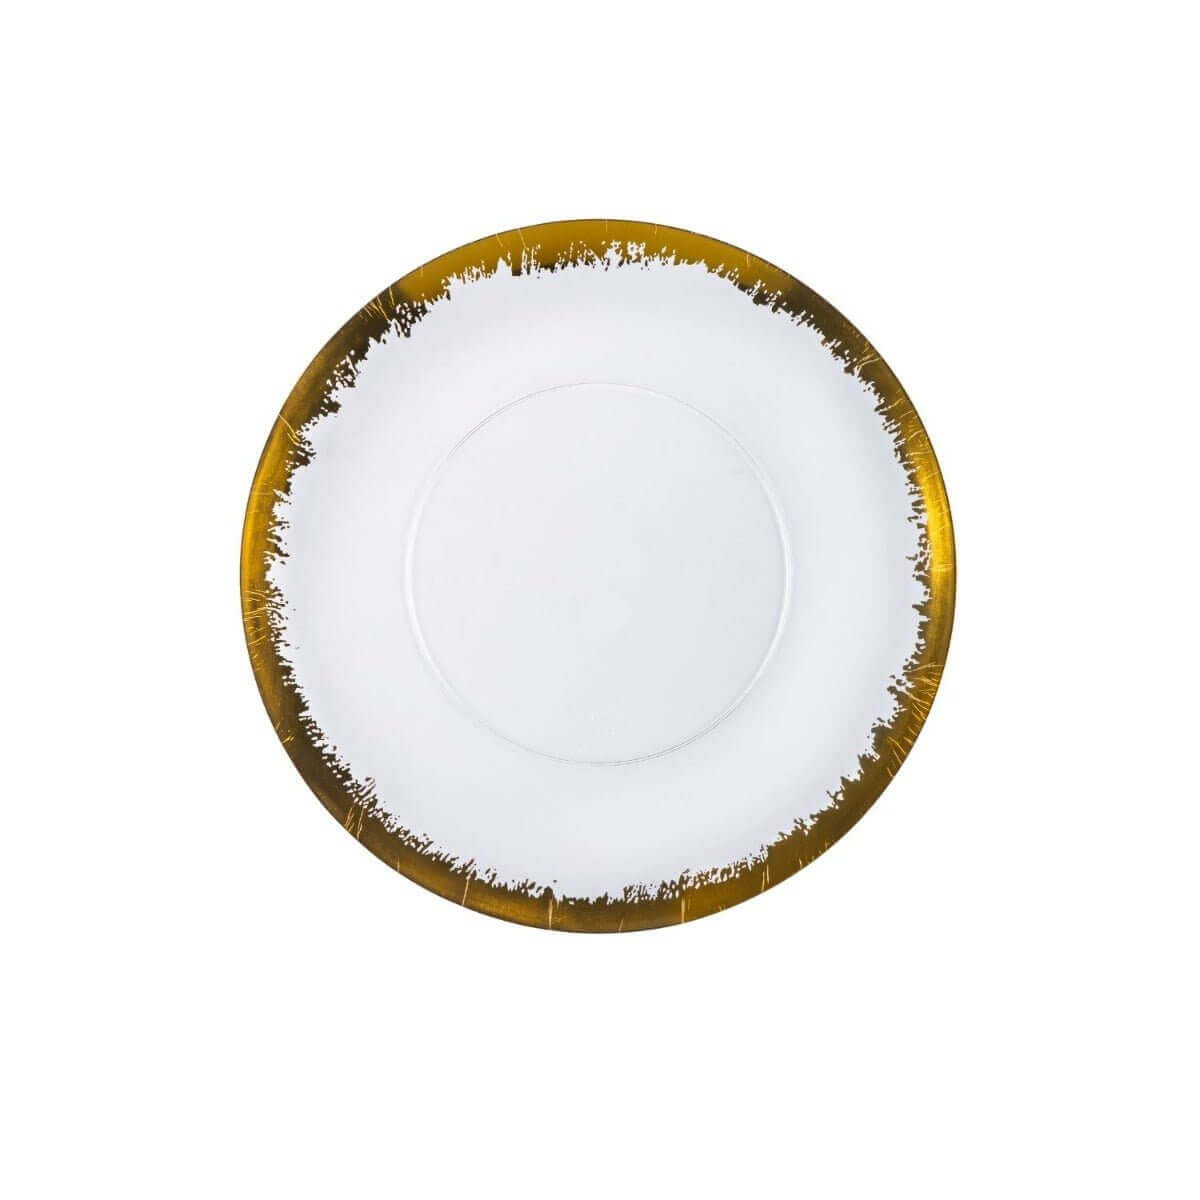 8" Gold Scratched Design Plastic Plates (40 Count) - Yom Tov Settings